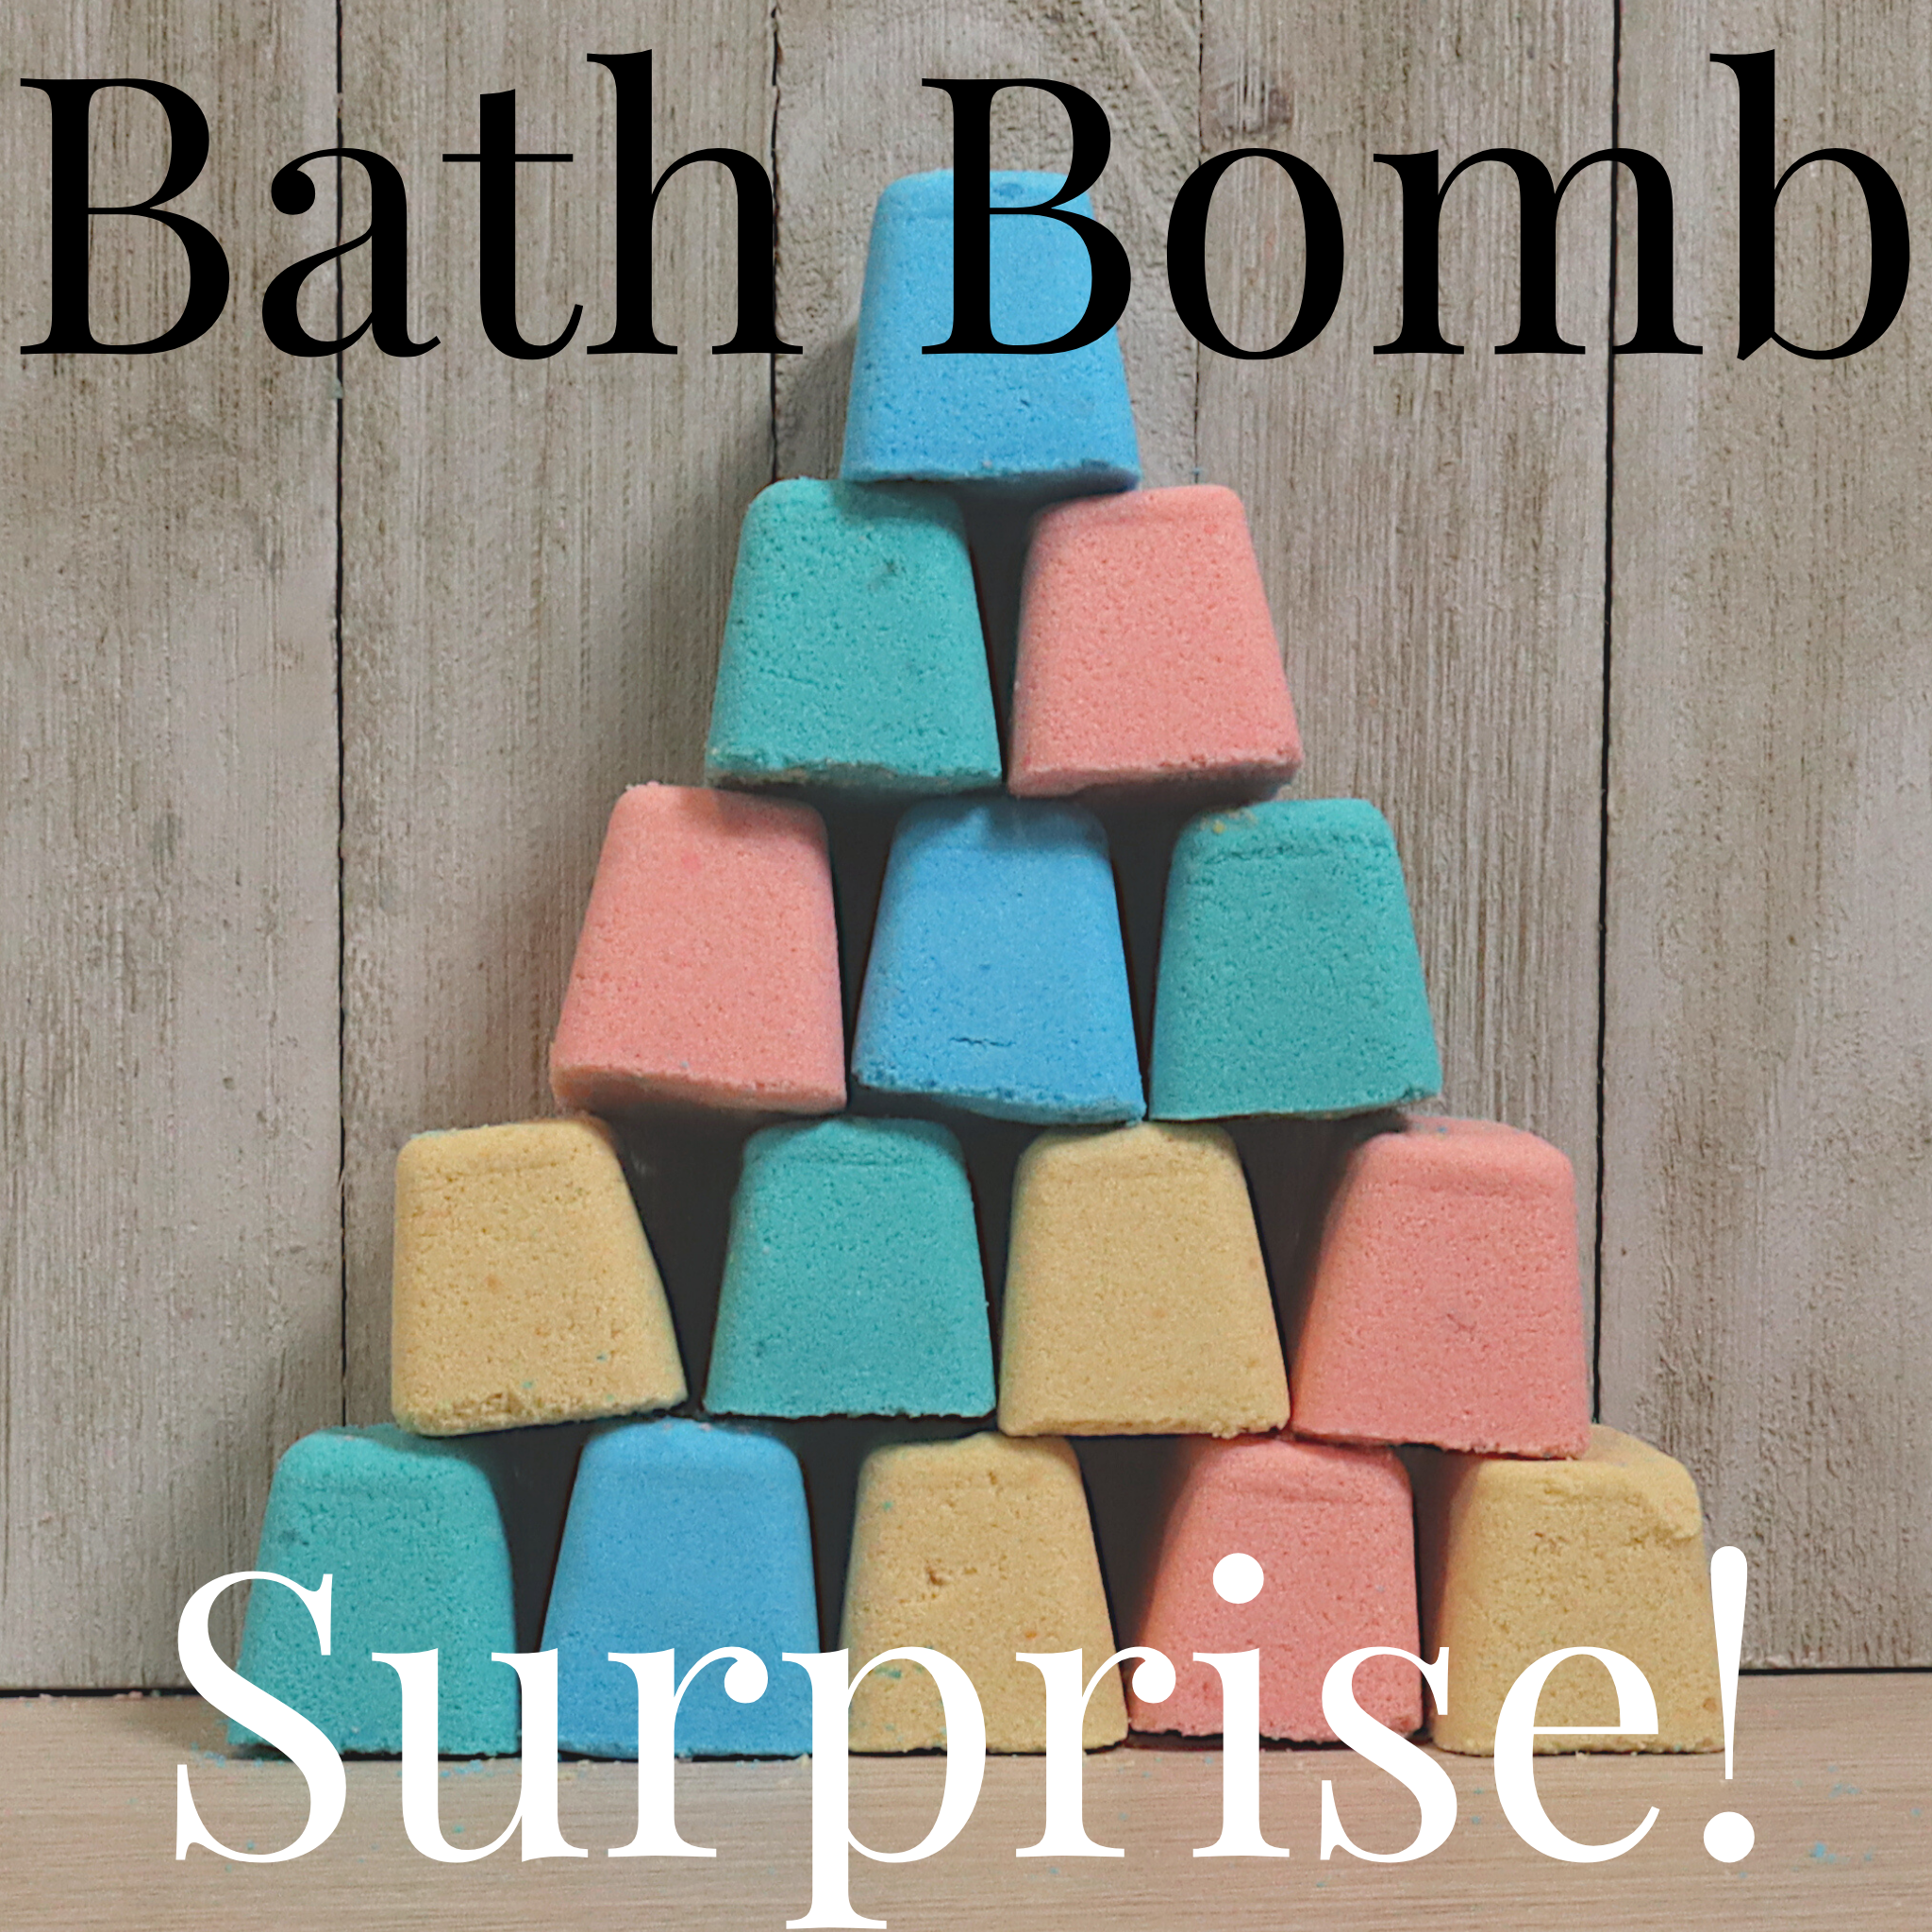 a pyramid stack of small bath bombs in all different colors. Bath bomb surprise is written across the image 